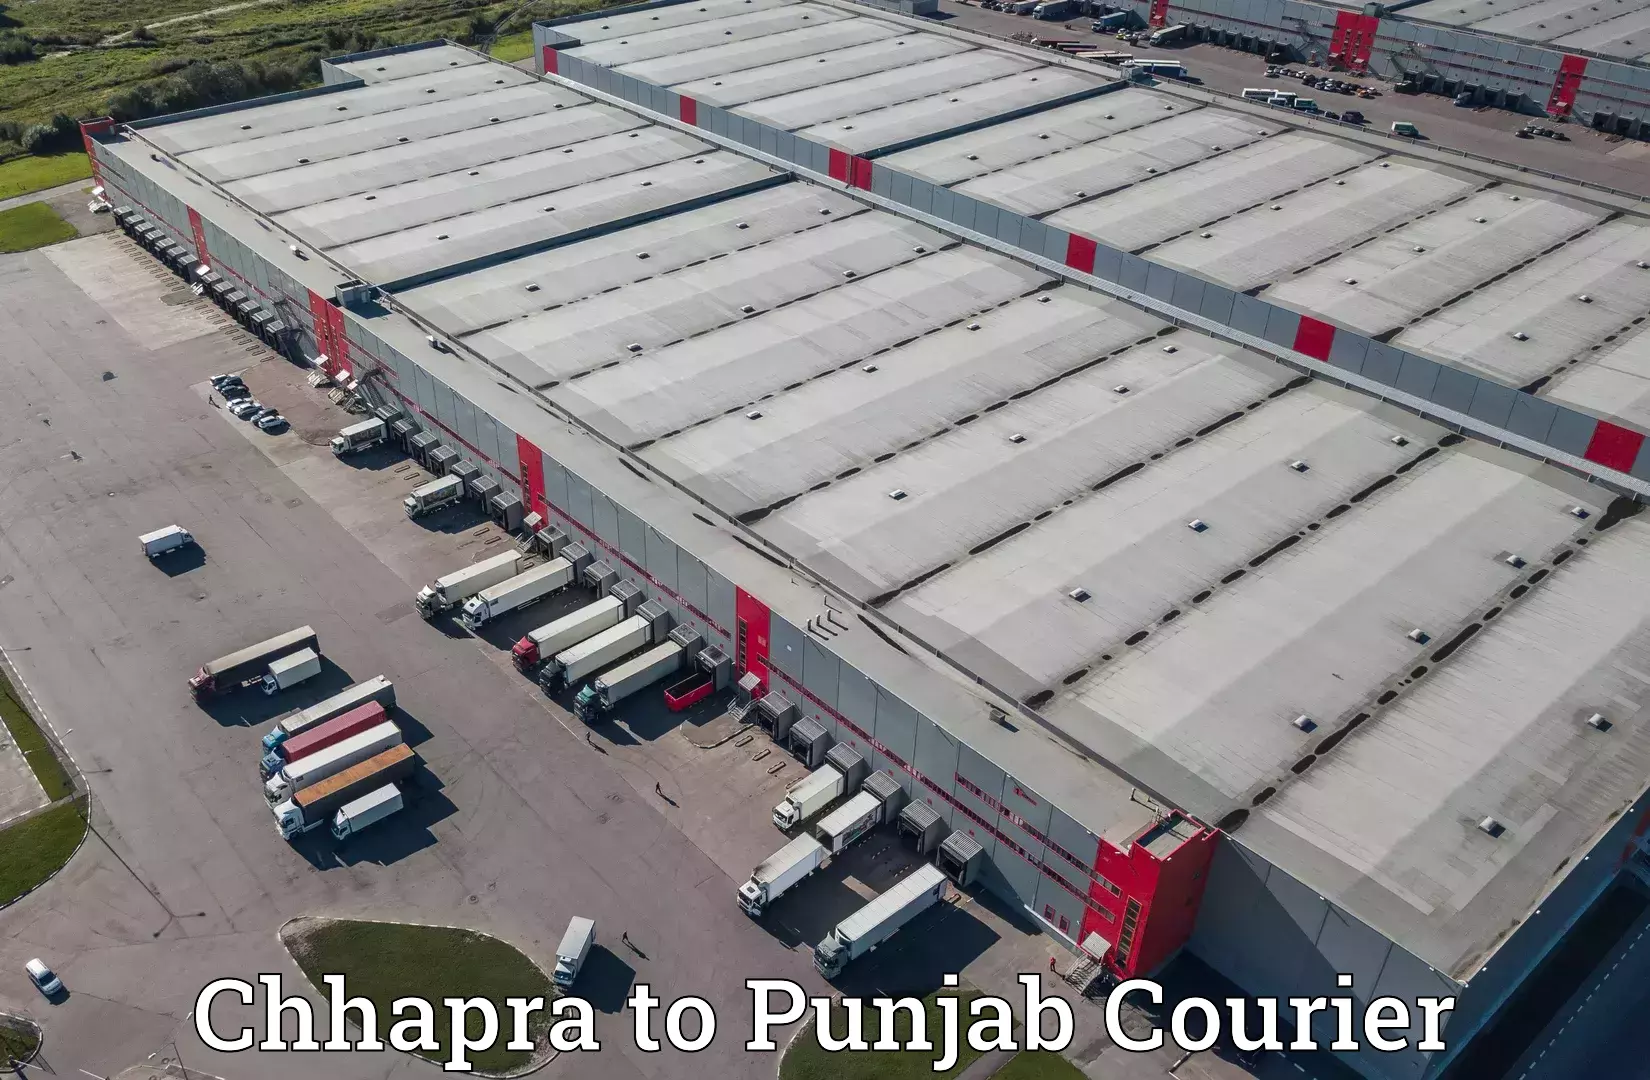 Efficient shipping operations Chhapra to Jalandhar